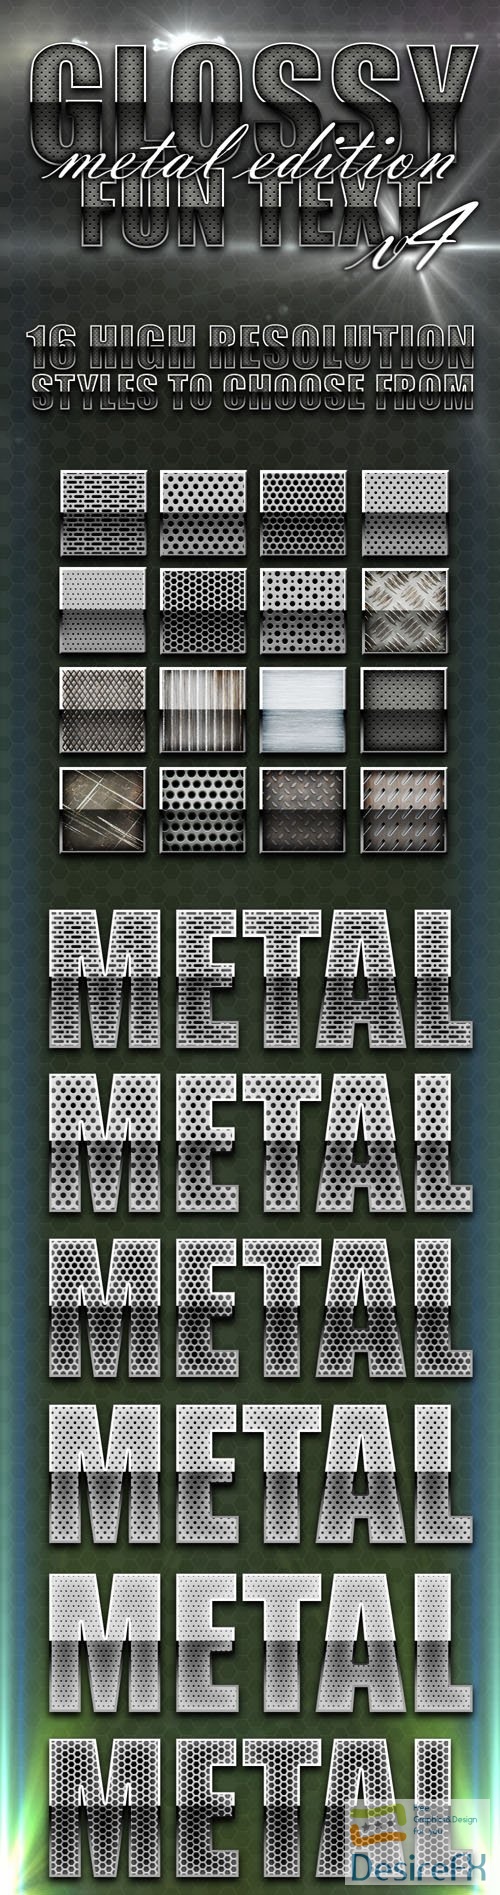 16 Glossy Metal Styles for Photoshop